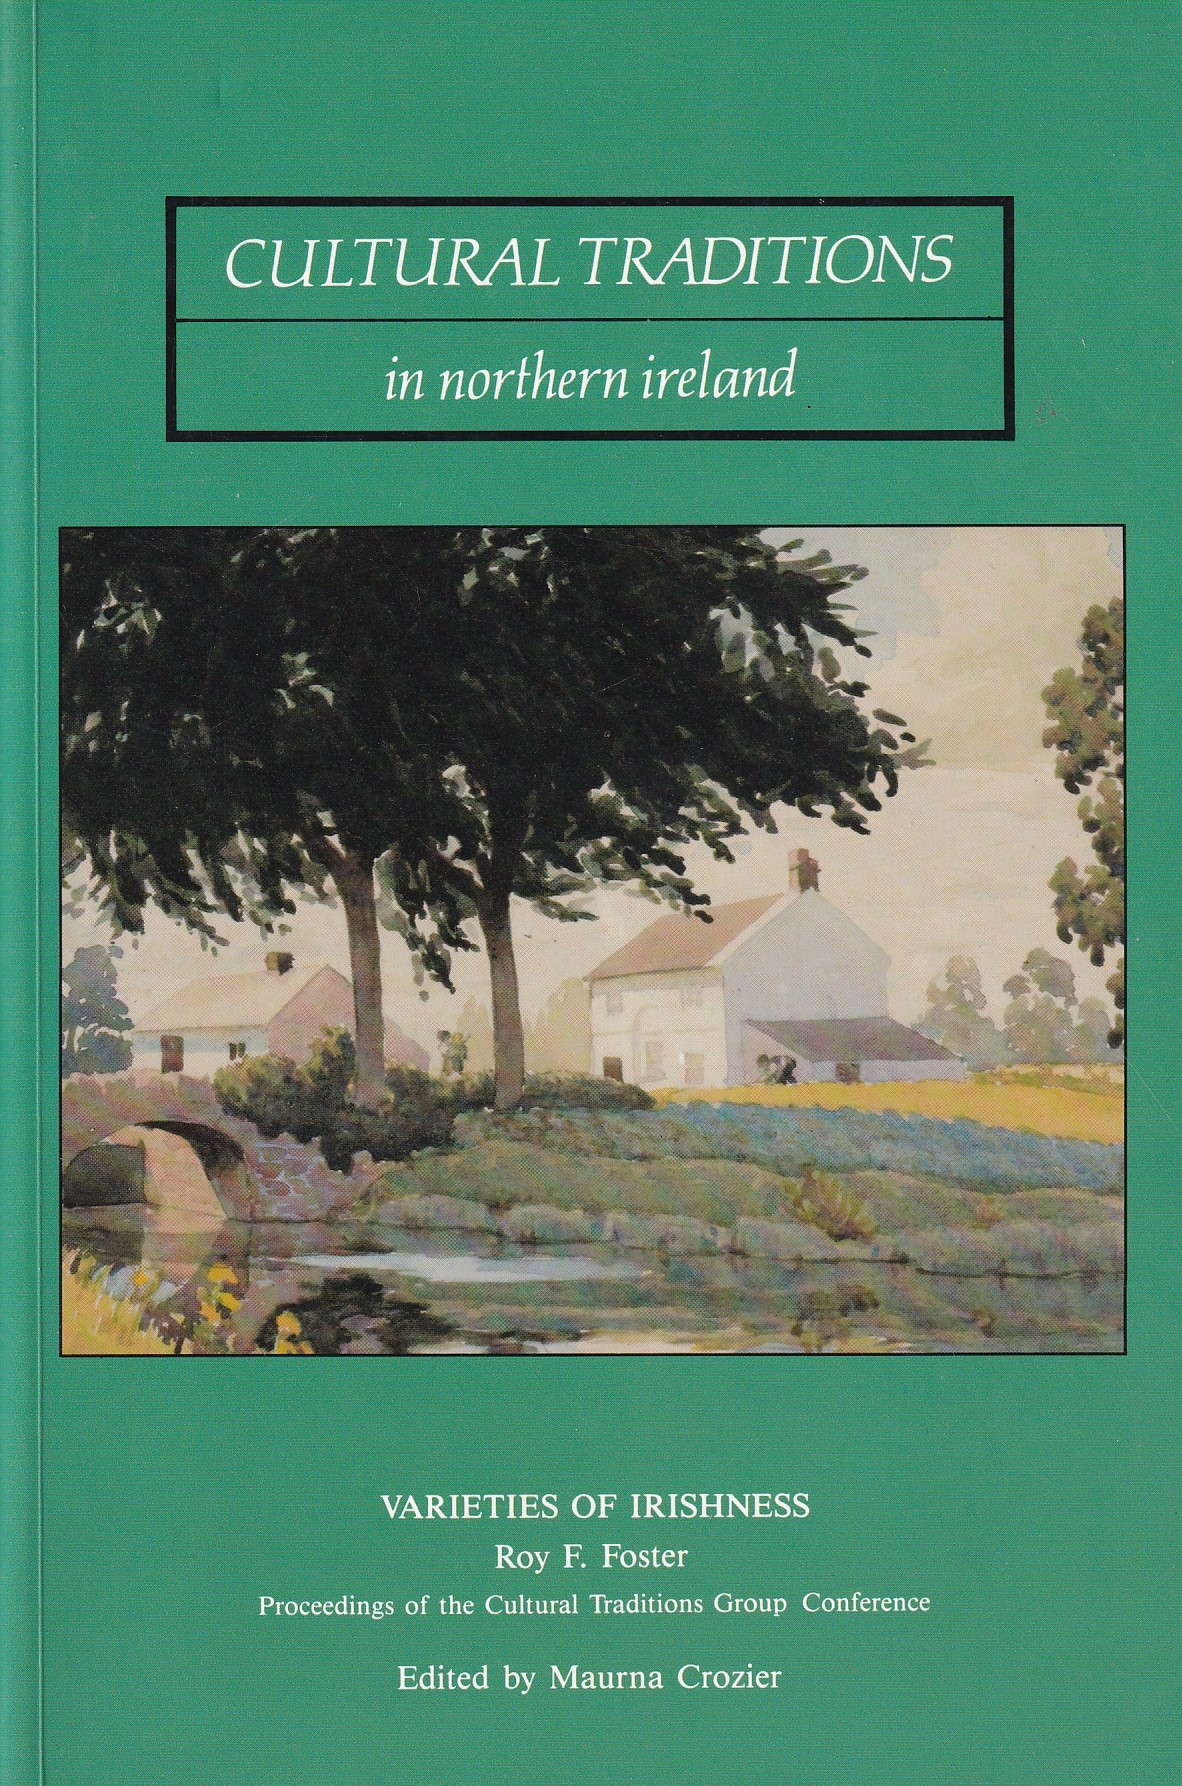 Cultural Traditions in Northern Ireland: Varieties of Irishness | Roy F. Foster (ed. Maurna Crozier) | Charlie Byrne's